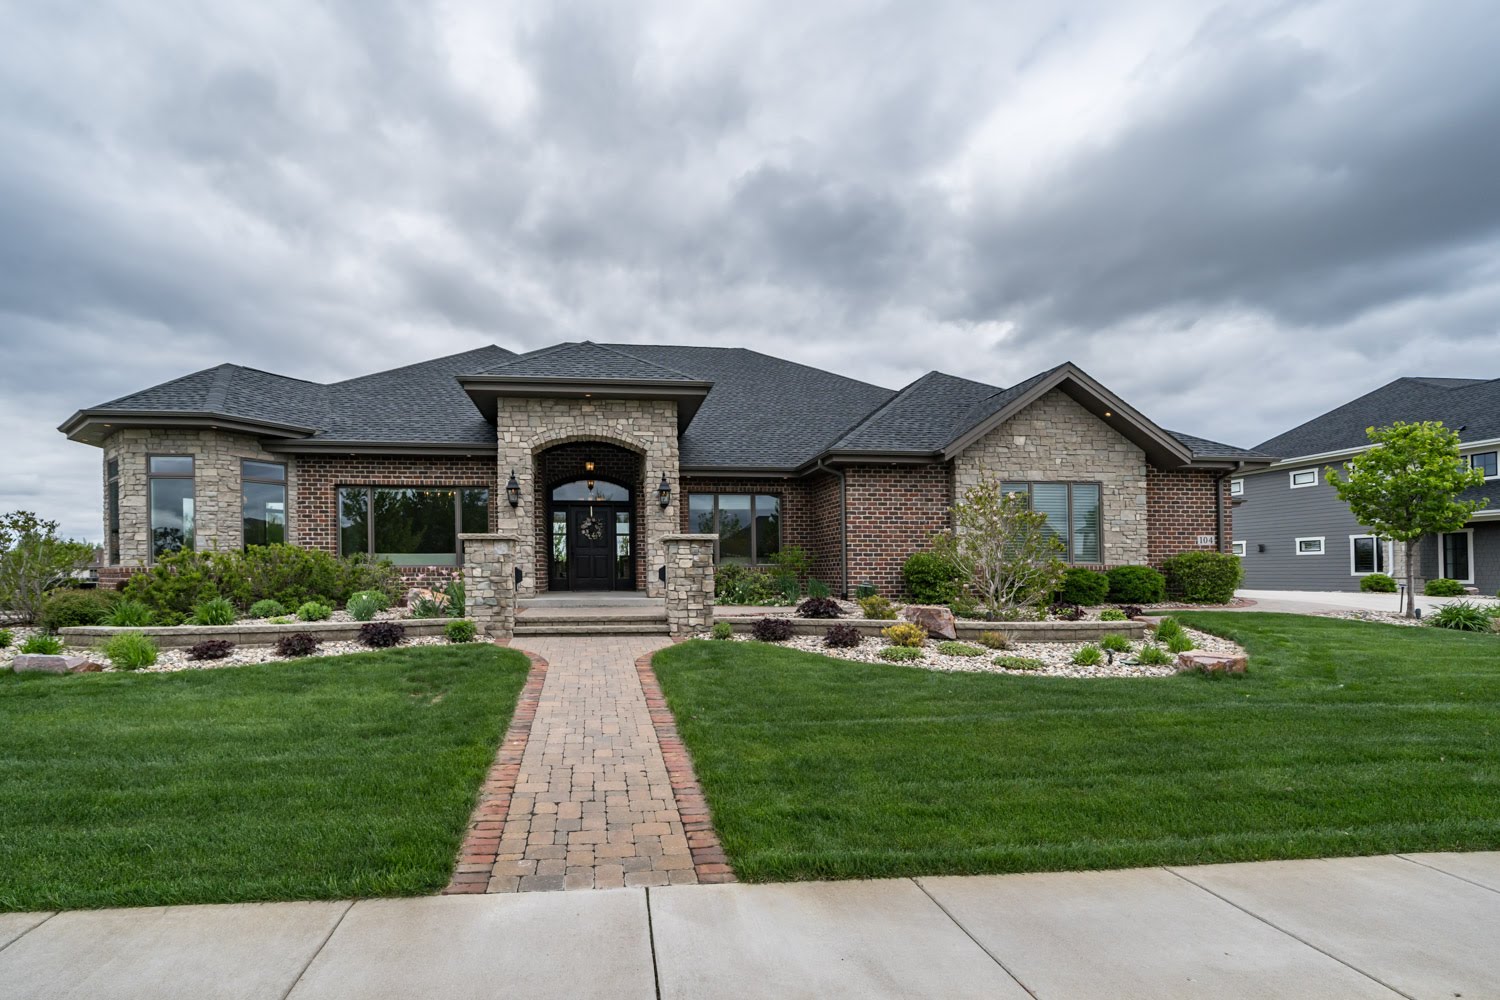 How To Build A Custom Home In Sioux Falls